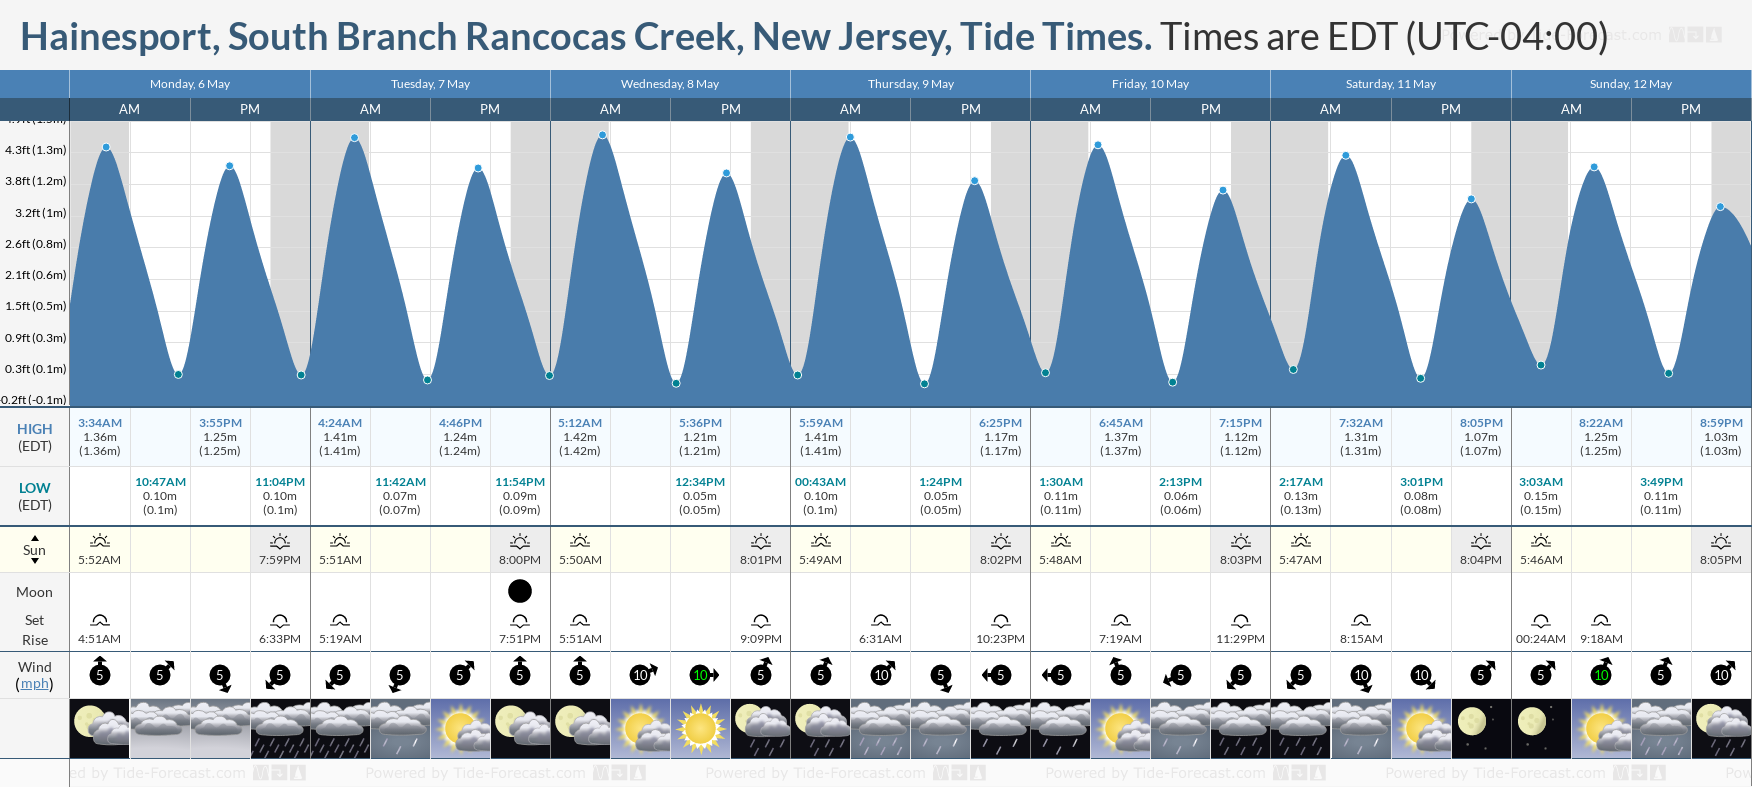 Hainesport, South Branch Rancocas Creek, New Jersey Tide Chart including high and low tide tide times for the next 7 days